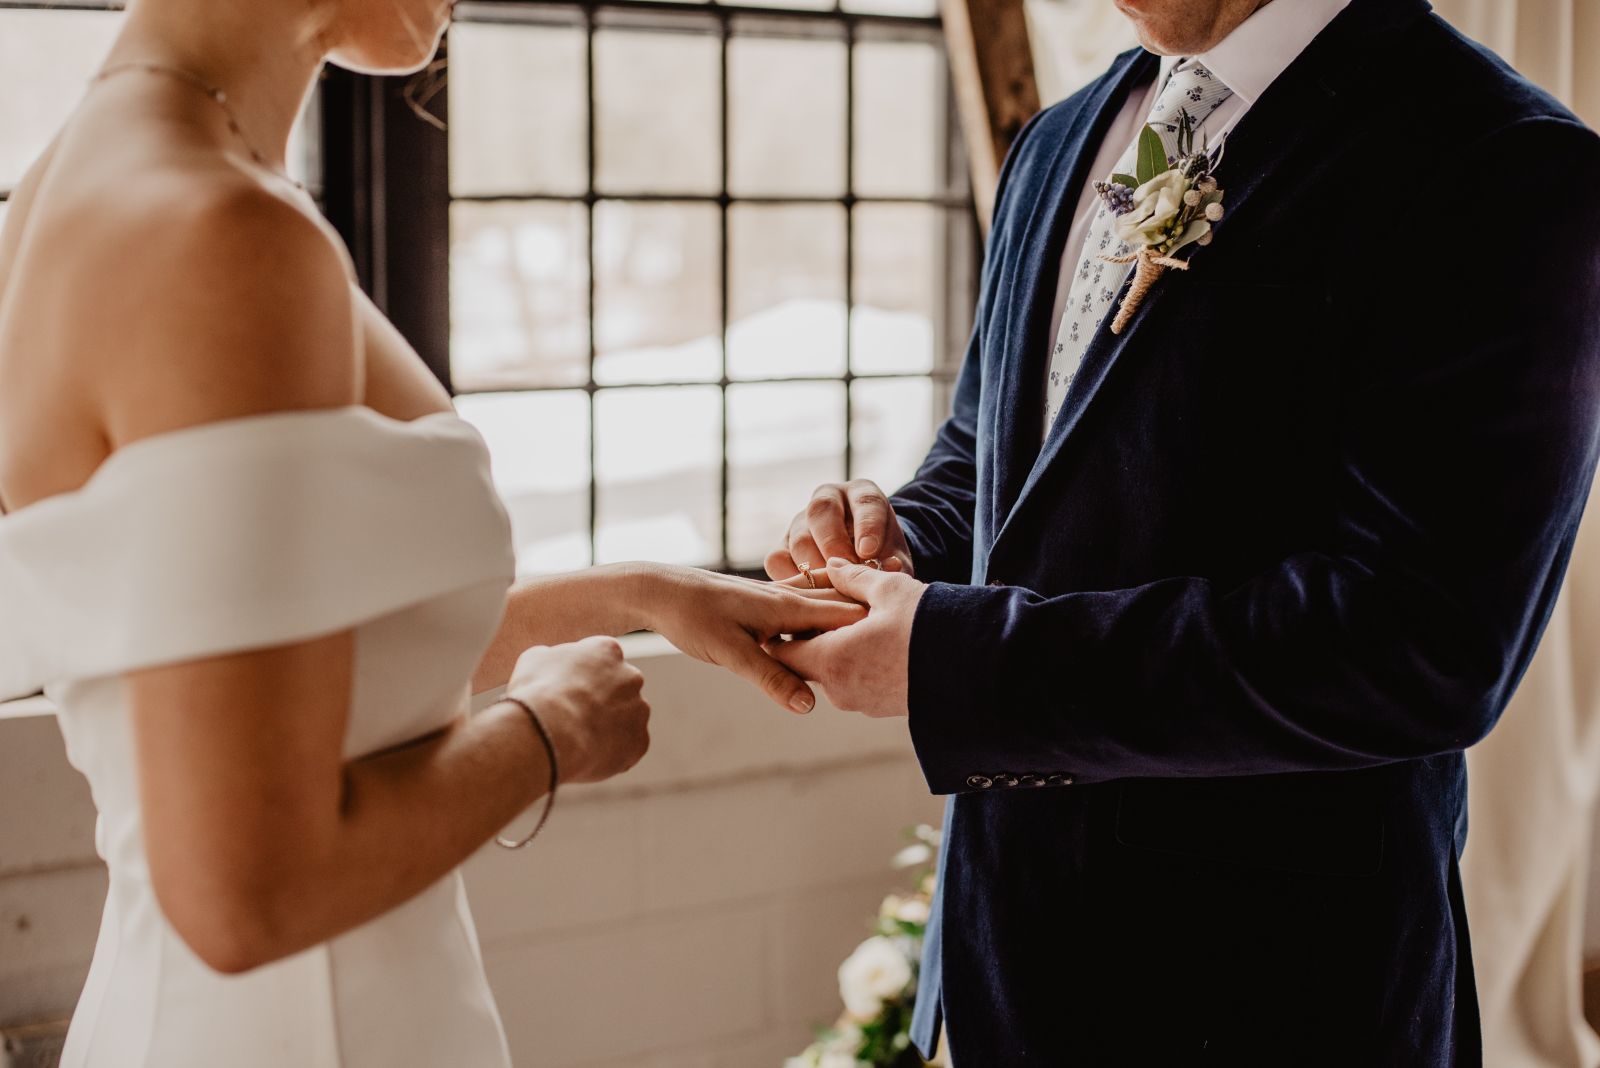 A groom giving a wedding ring to his future wife